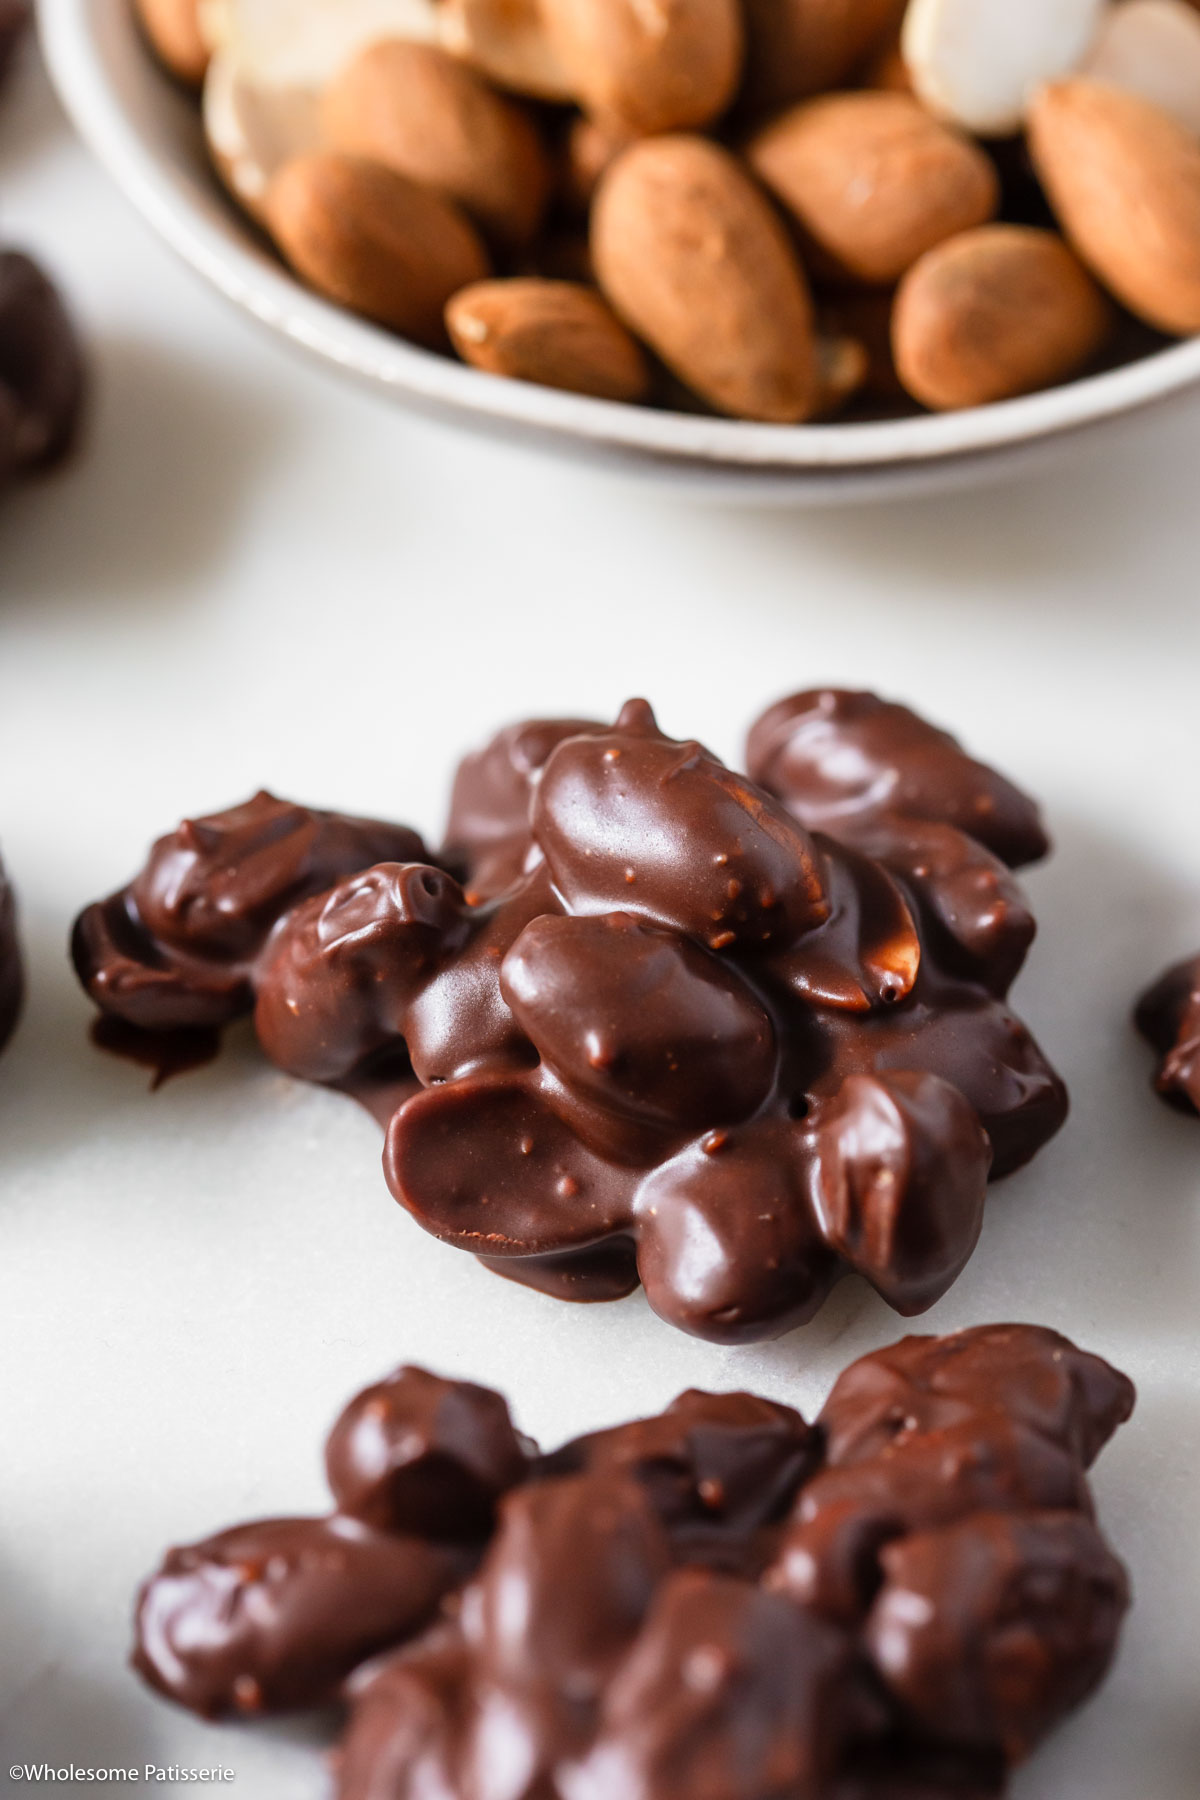 Close up view of one cluster of chocolate covered almonds